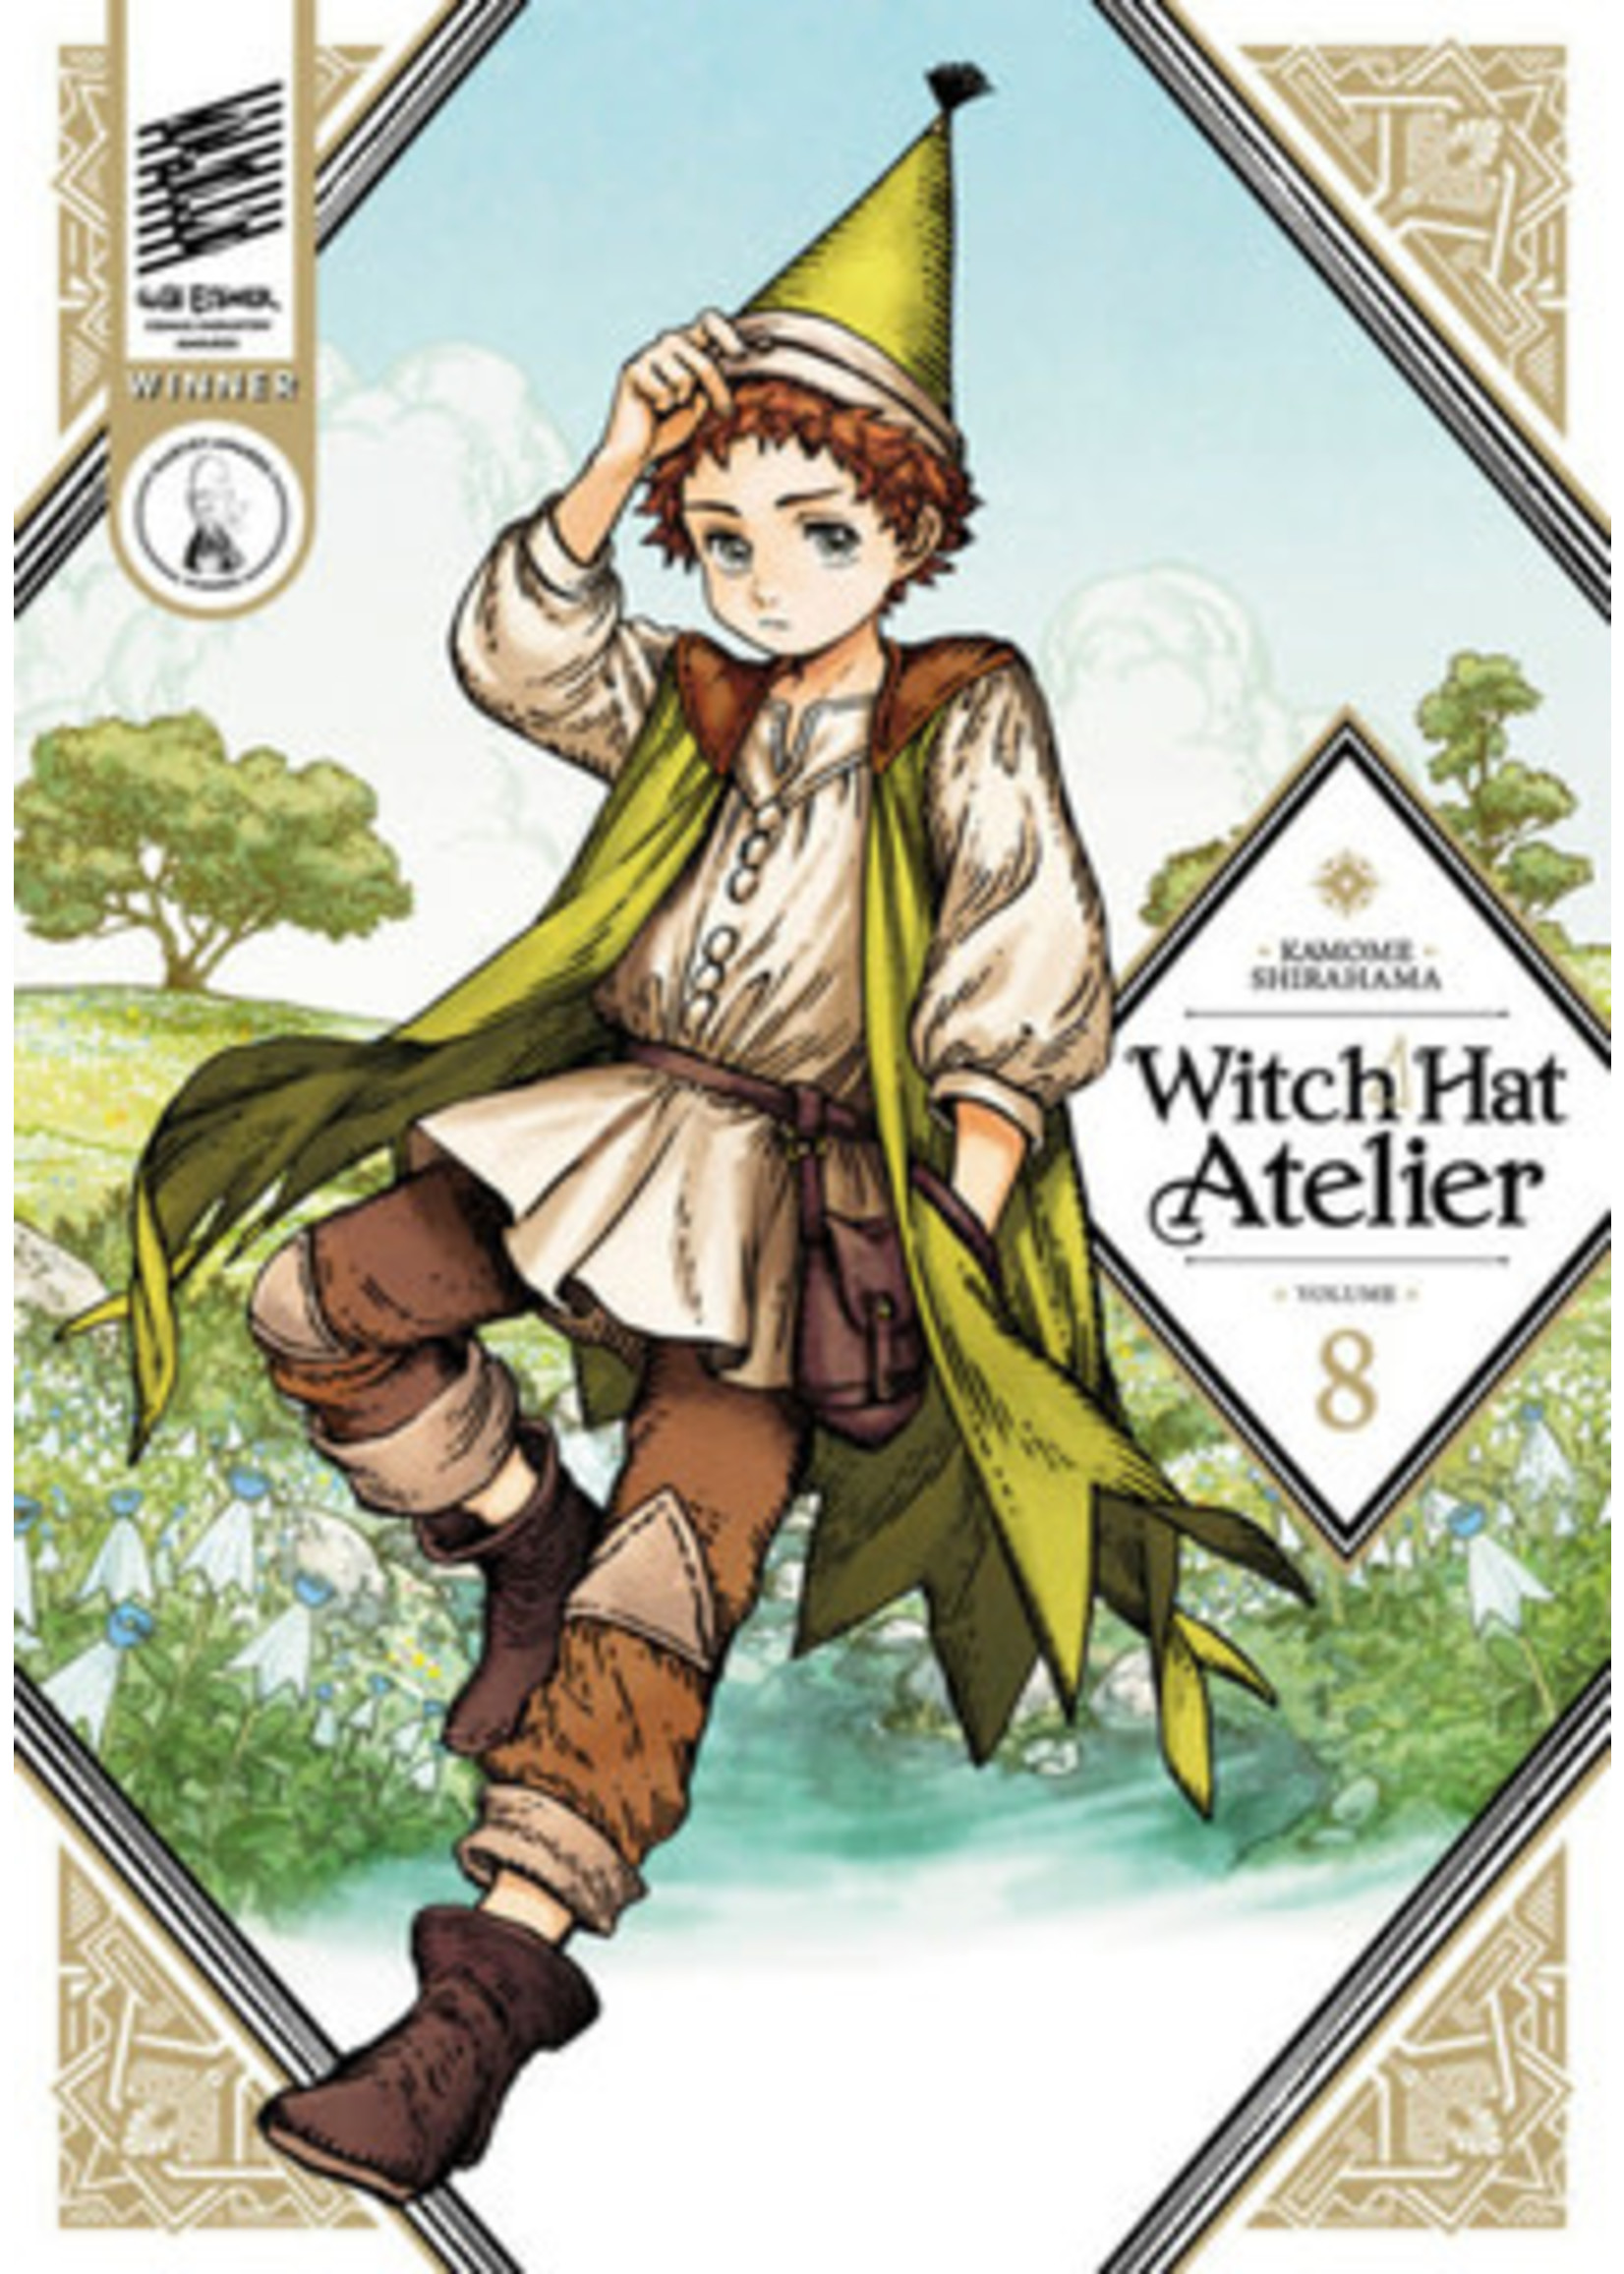 Witch Hat Atelier, Vol. 8 by Kamome Shirahama